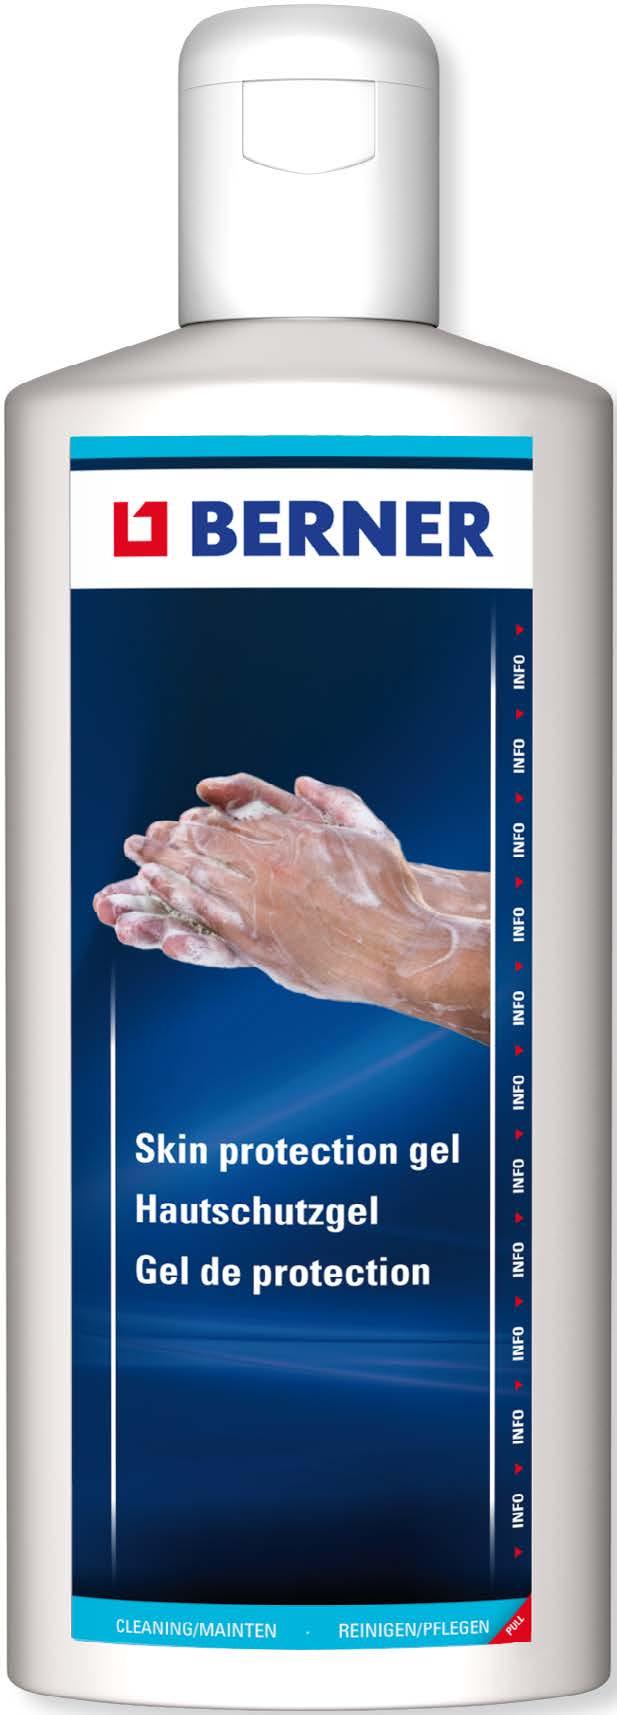 MISSION: CLEAN HANDS SKIN PROTECTION GEL For use with gloves INCREASES THE SKIN S RESISTANCE: contains witch hazel (hamamelis) that strengthens the outer layers of the skin.